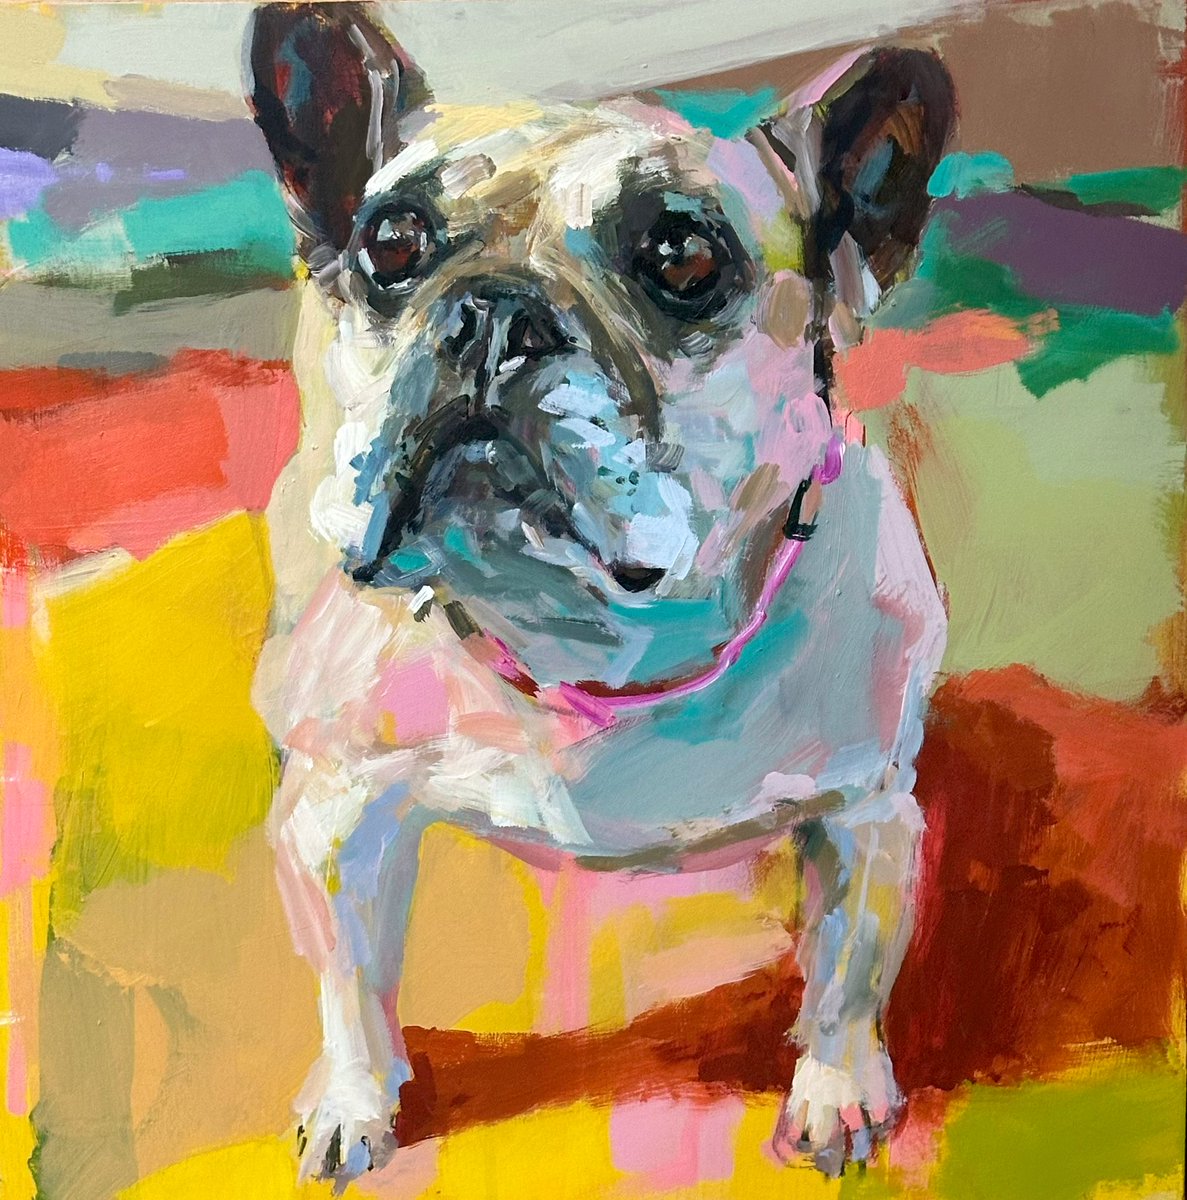 Park dog no 3 - Bud. She’s an old girl of 12 years and a bit wobbly on her hind legs. A little cutie, she taps me on the foot with her front paw when she wants a pat. 🥰 #acrylicpainting #ArtistOnTwitter